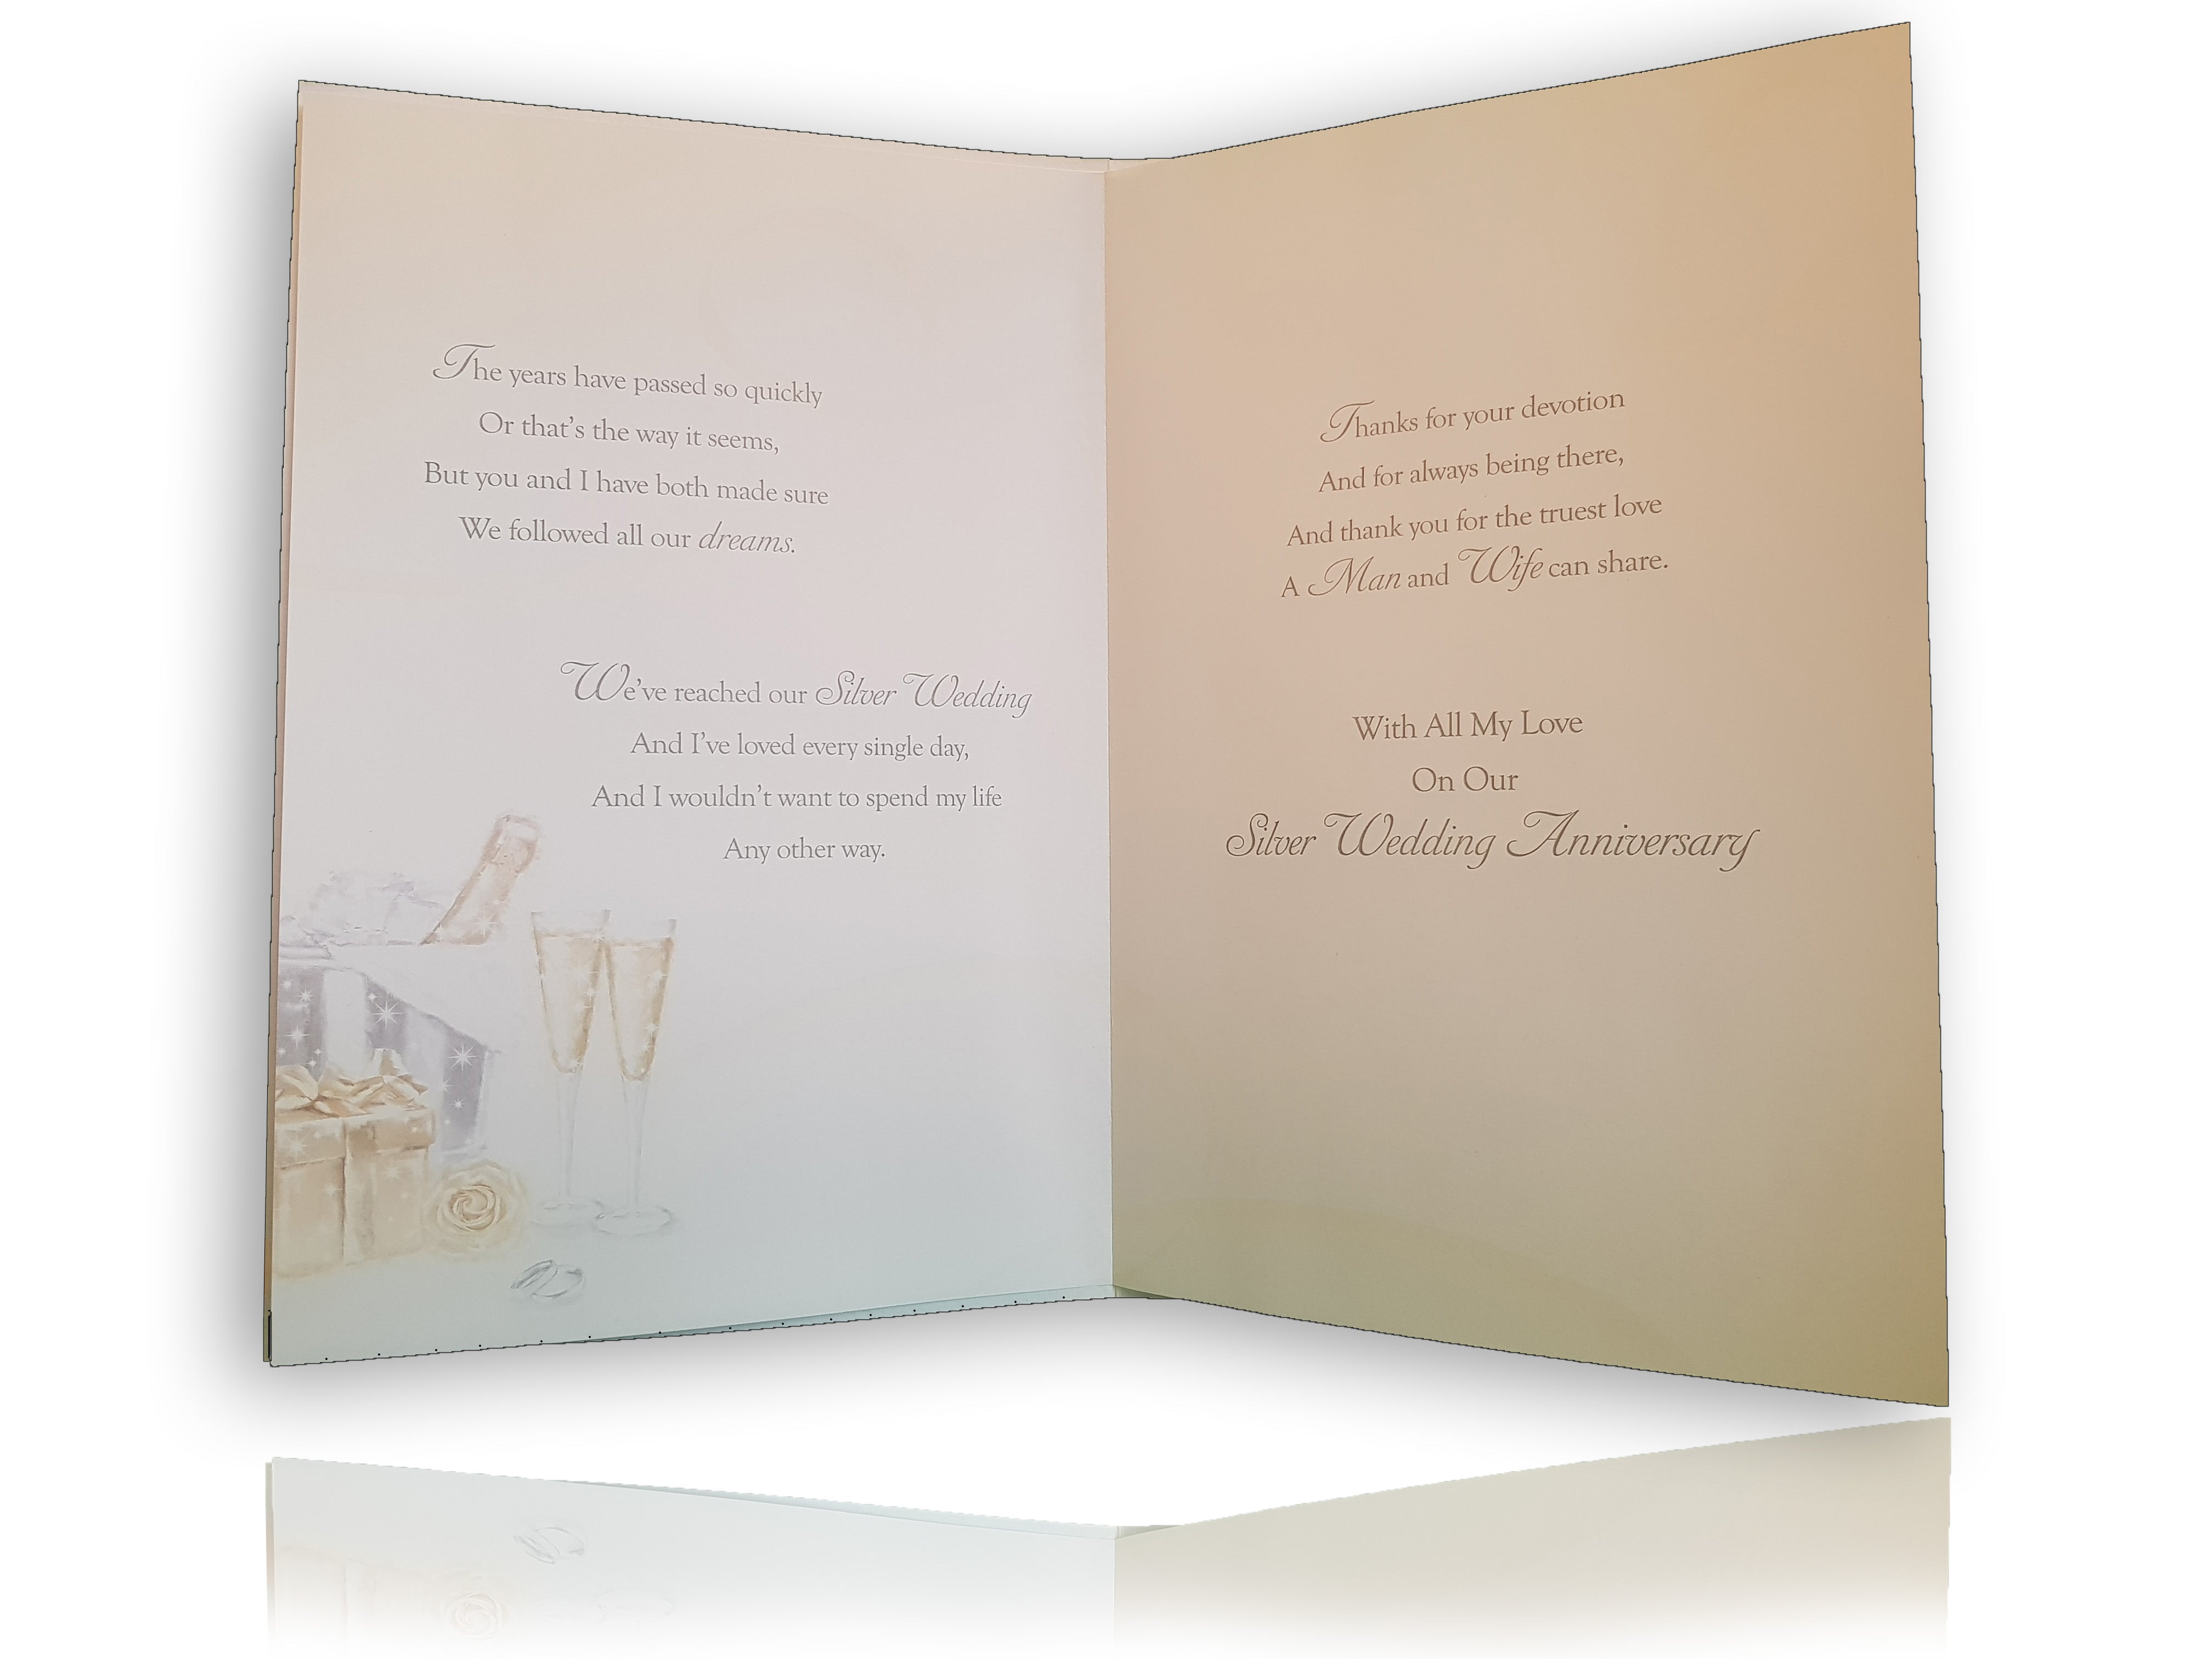 Husband's 25th Wedding Anniversary Card - Champagne, Rings, and Heartfelt Wishes